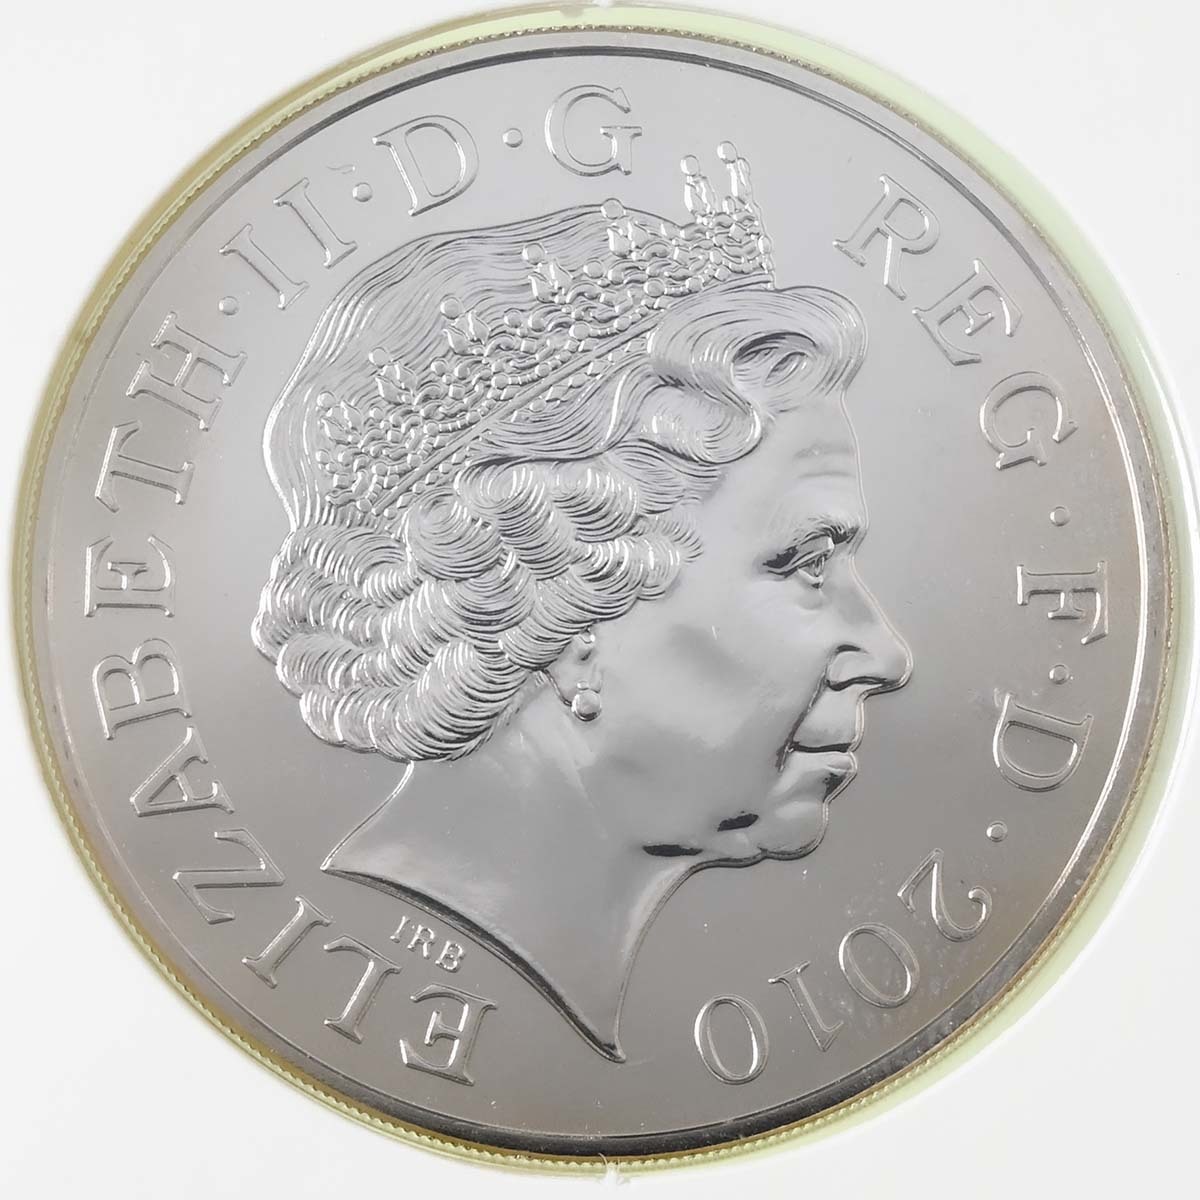 2010 Restoration Of The Monarchy Five Pound Crown Brilliant Uncirculated Coin In Folder Obverse